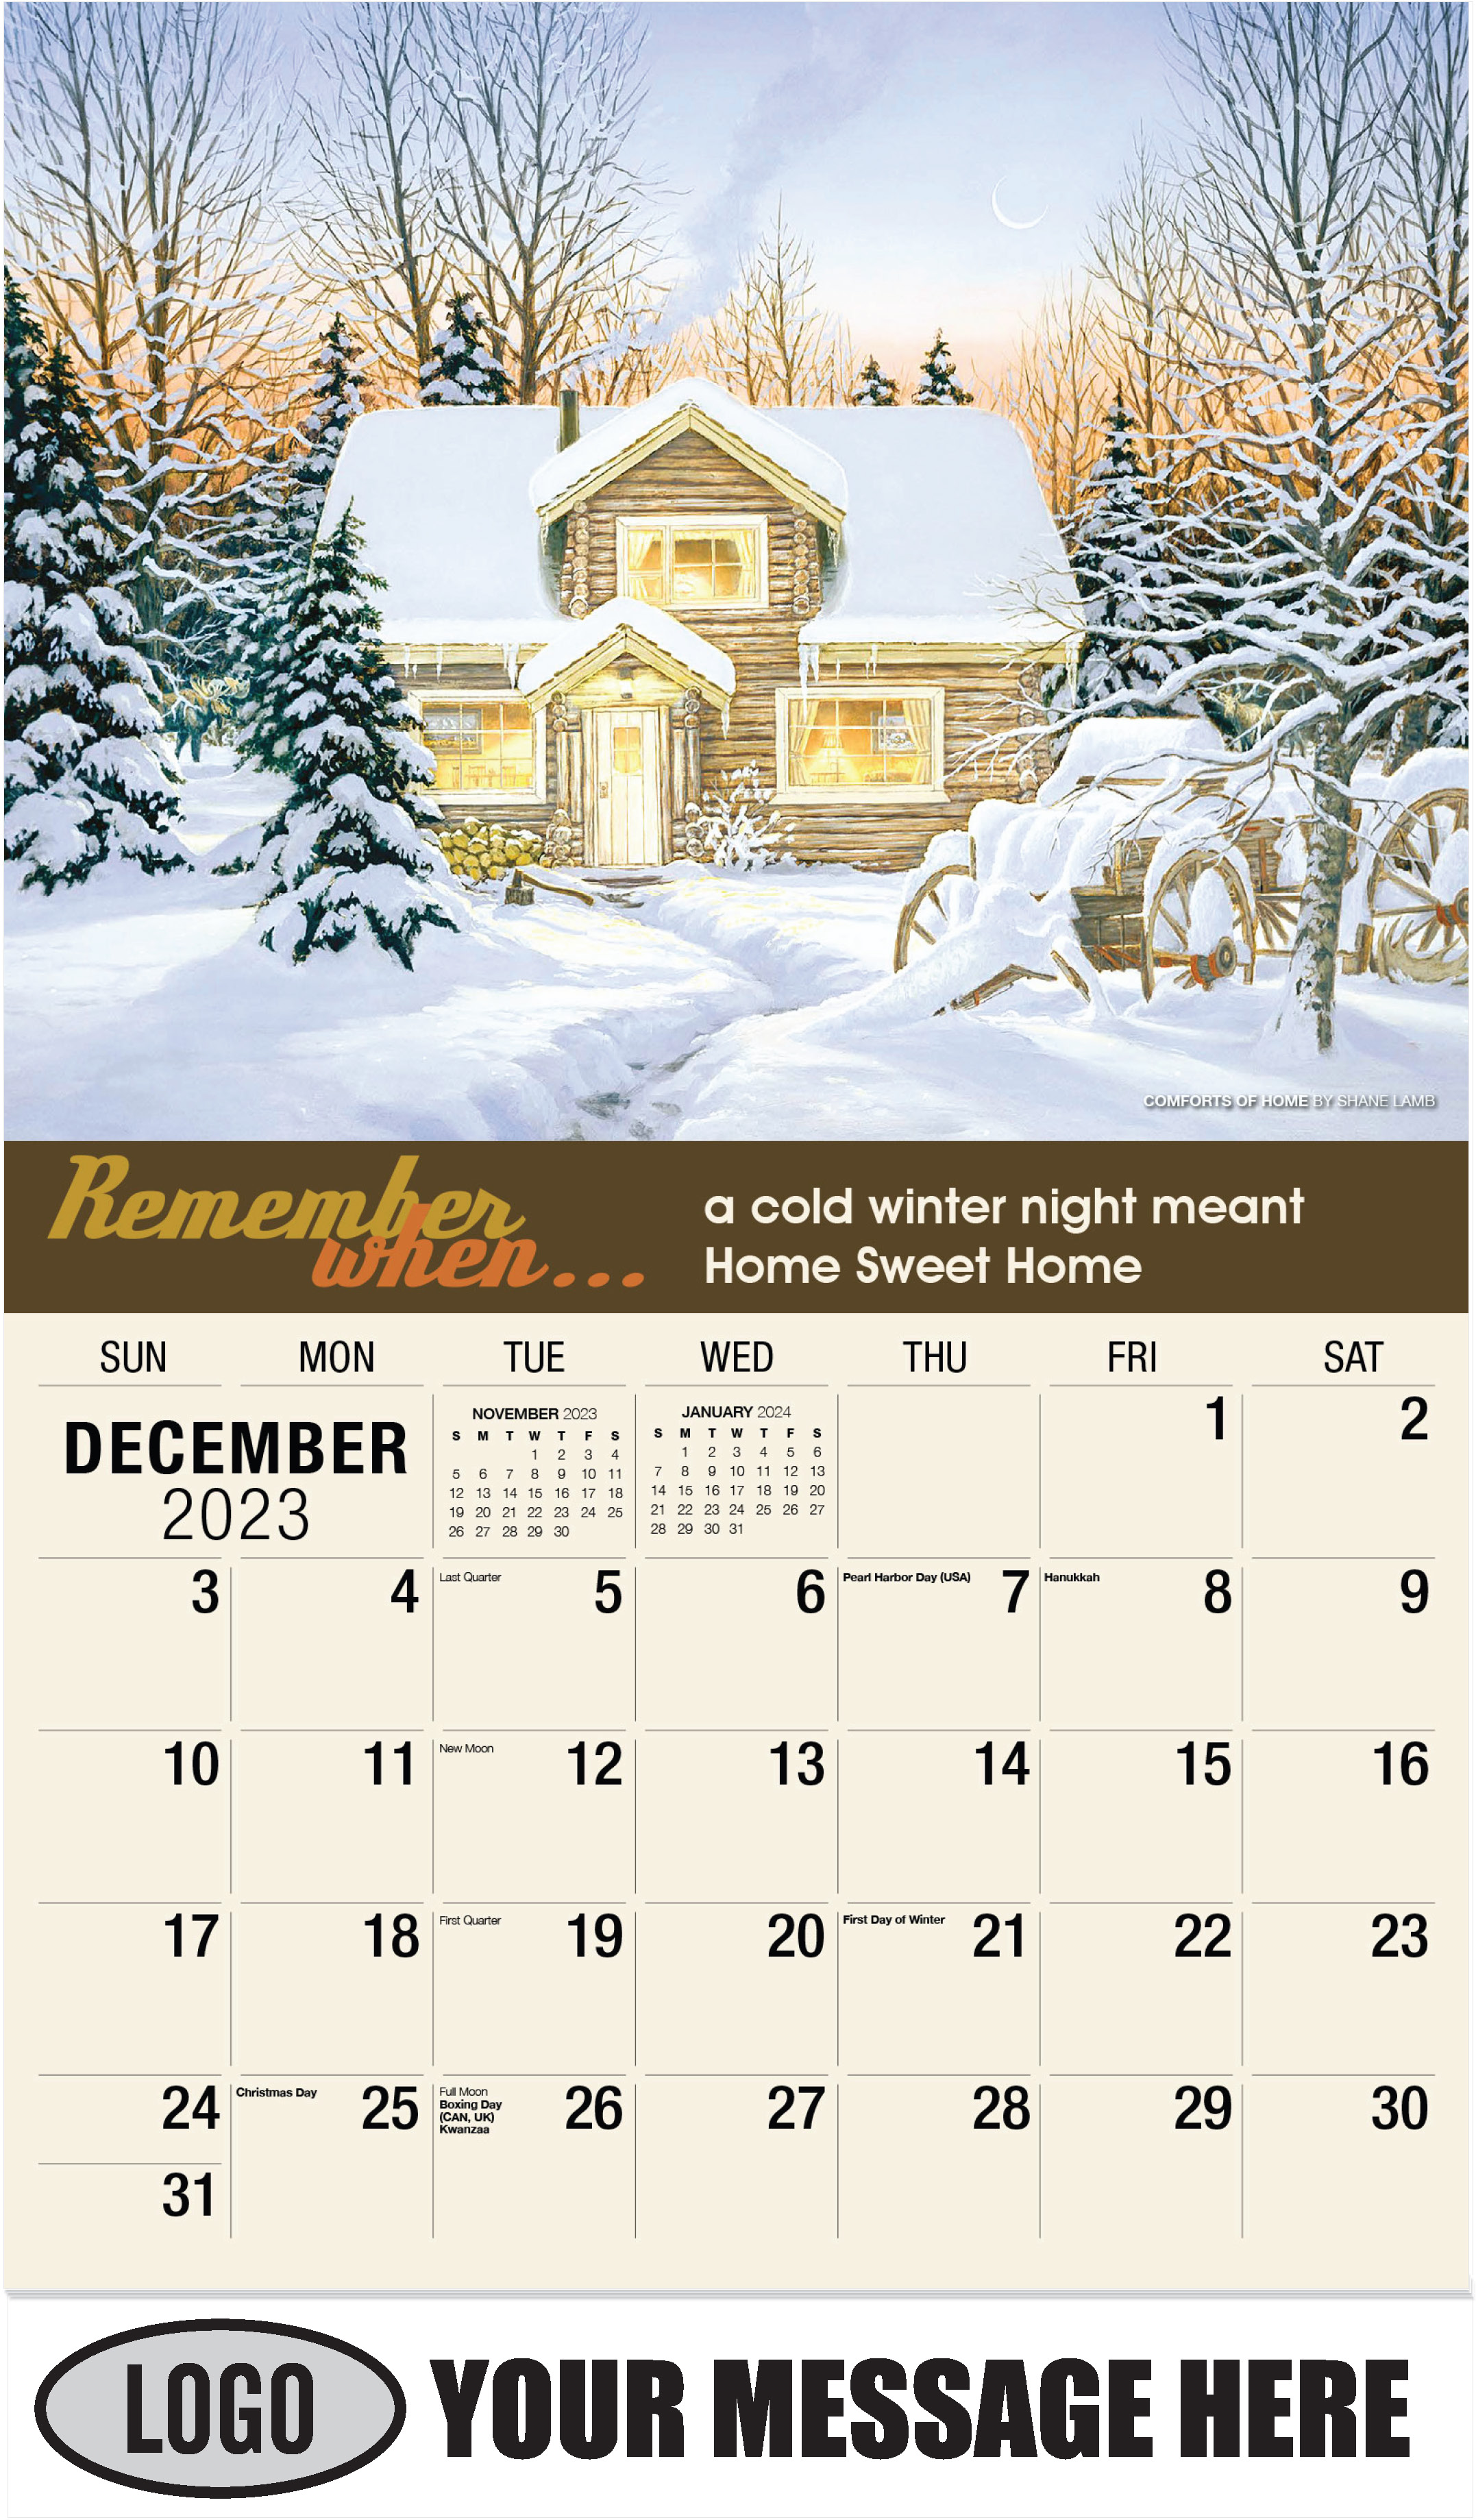 Comforts of Home by Shane Lamb - December 2023 - Remember When 2023 Promotional Calendar